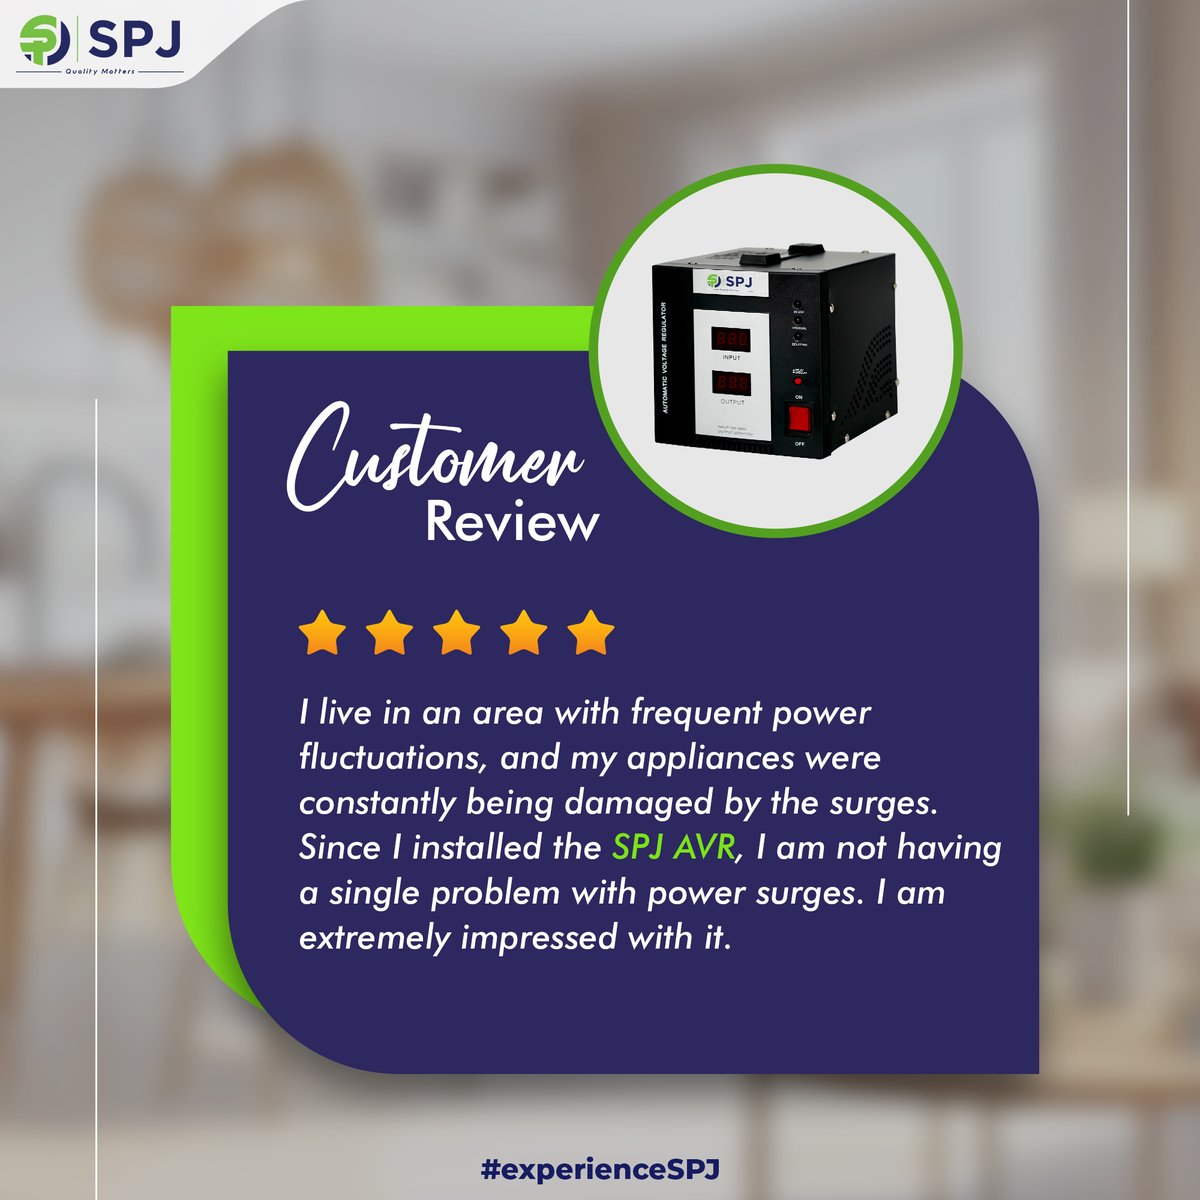 Thank You for Your Incredible Review!
.
.
.
#spj #spjelectronics #electronics #voltageregulator  #RegisterToVote #SAvsAUS #ActiveLifestyle #KonkaLive #Cassie #SAelections24